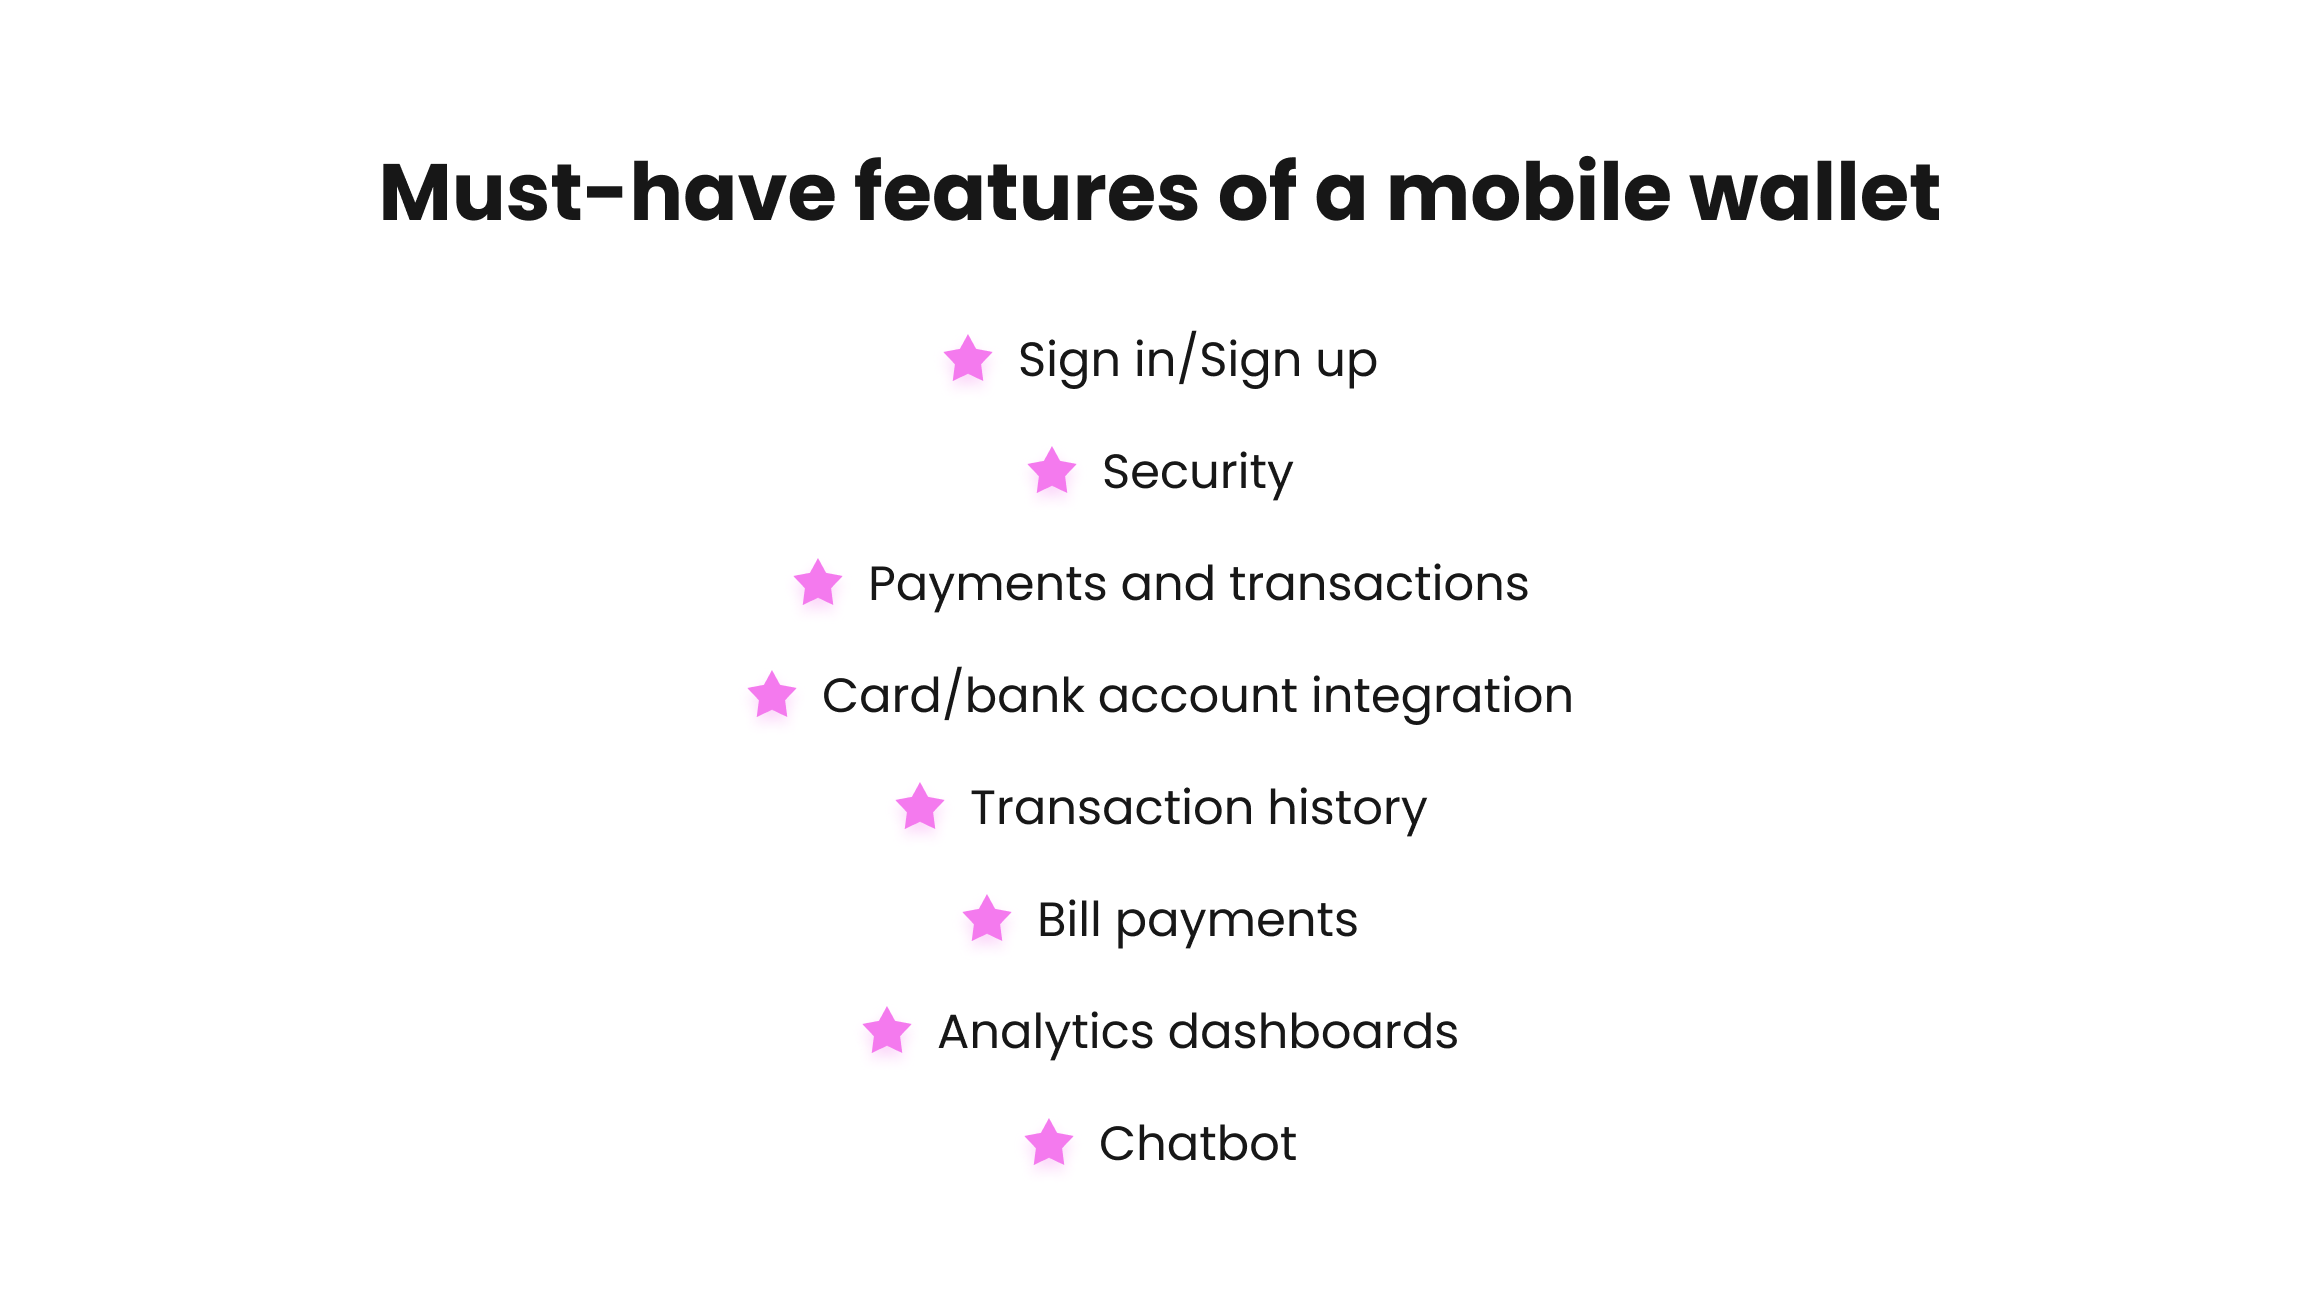 Features of digital wallets